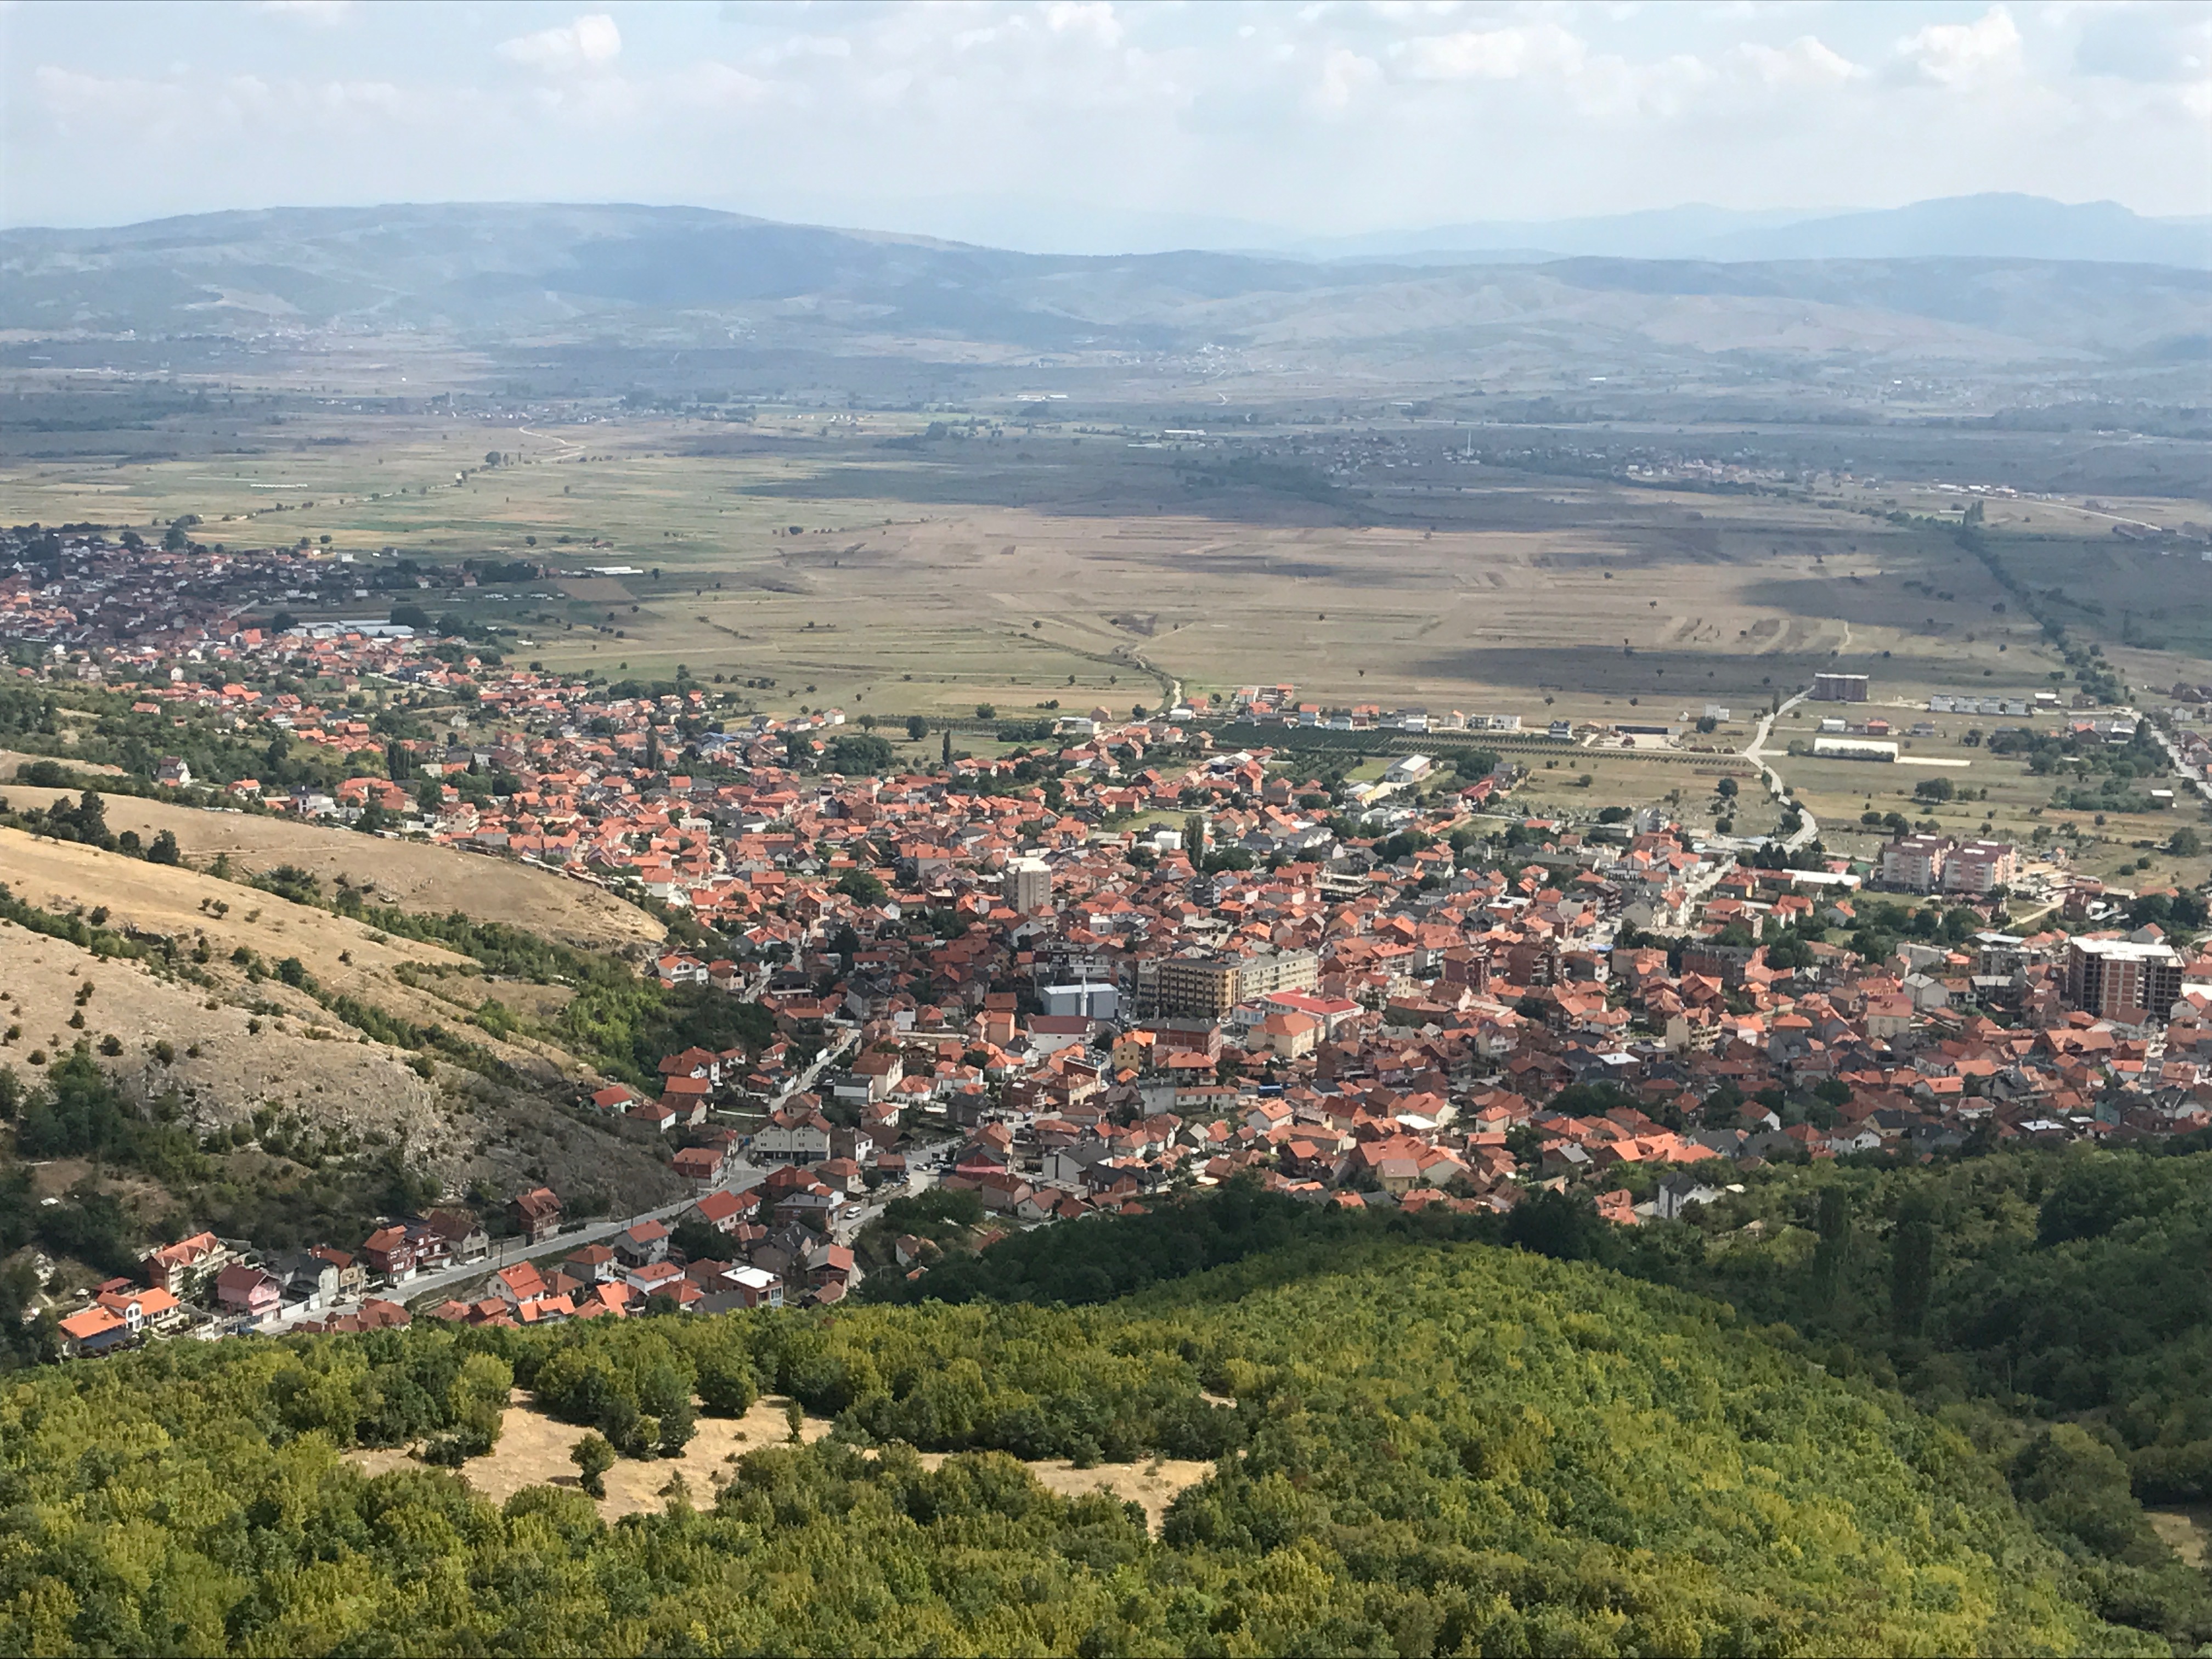 Serbia’s Presevo Valley with the city of Presevo in the foreground